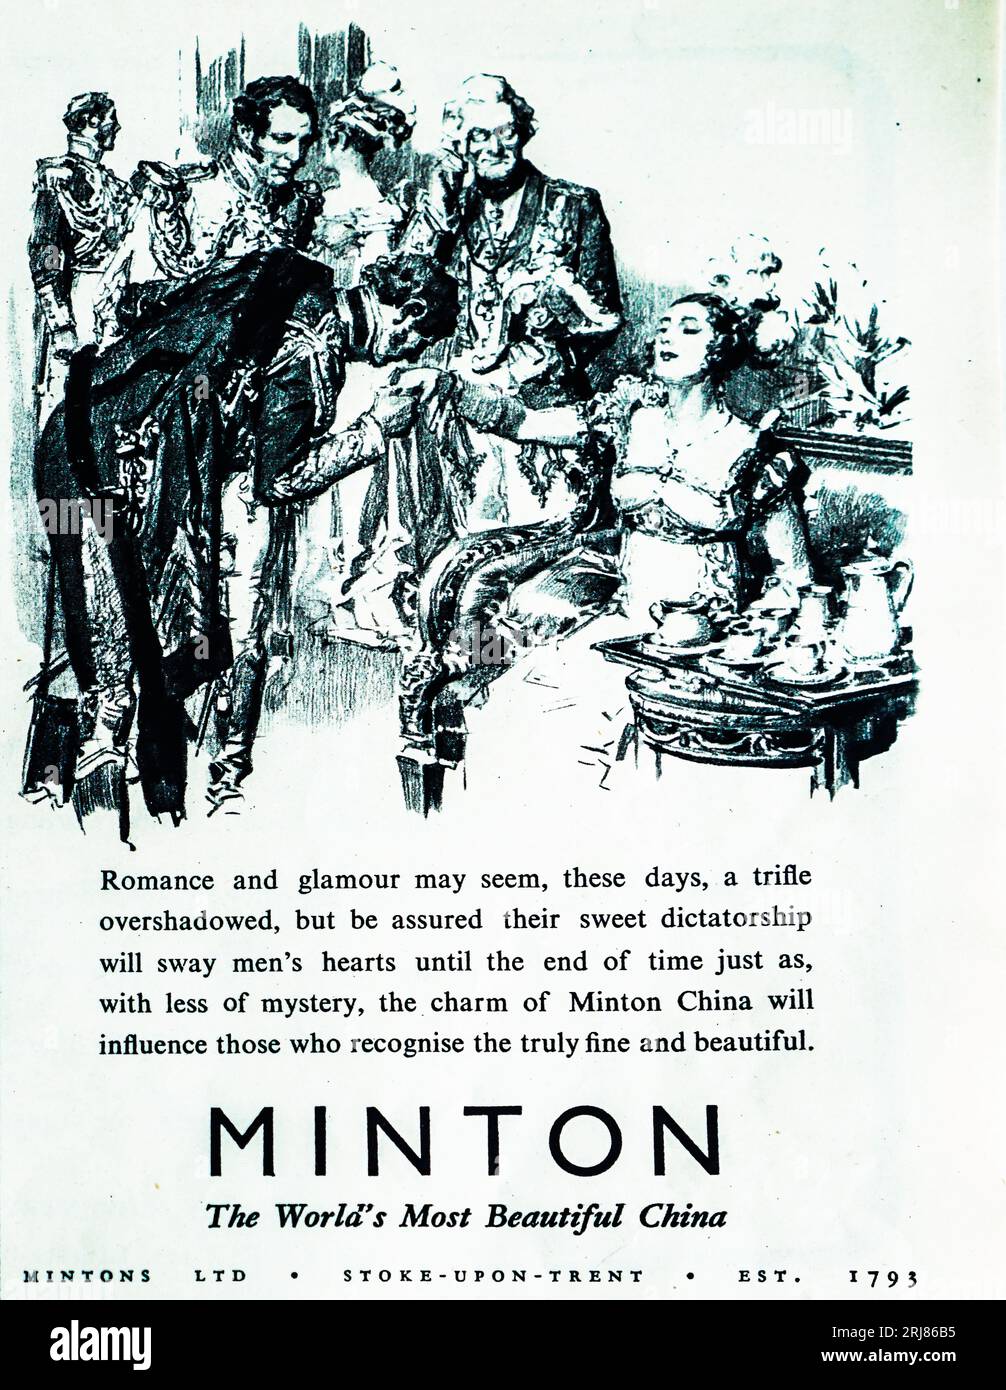 A 1945 wartime advertisement for Minton China ‘the worlds most beautiful china’. The company dates back to 1793 when production commenced in Stoke On Trent in Staffordshire, England. The original founder was Thomas Minton who formed a partnership with Joseph Paulson to market earthenware and bone china. In the 1950s the company merged with the Royal Doulton Group and by the 1980s production of Minton China was in decline. In the 1990s the Minton factories and offices were demolished as part of rationalisation within the Doulton Group. In 2005 Royal Doulton was acquired by Waterford Wedgwood. Stock Photo